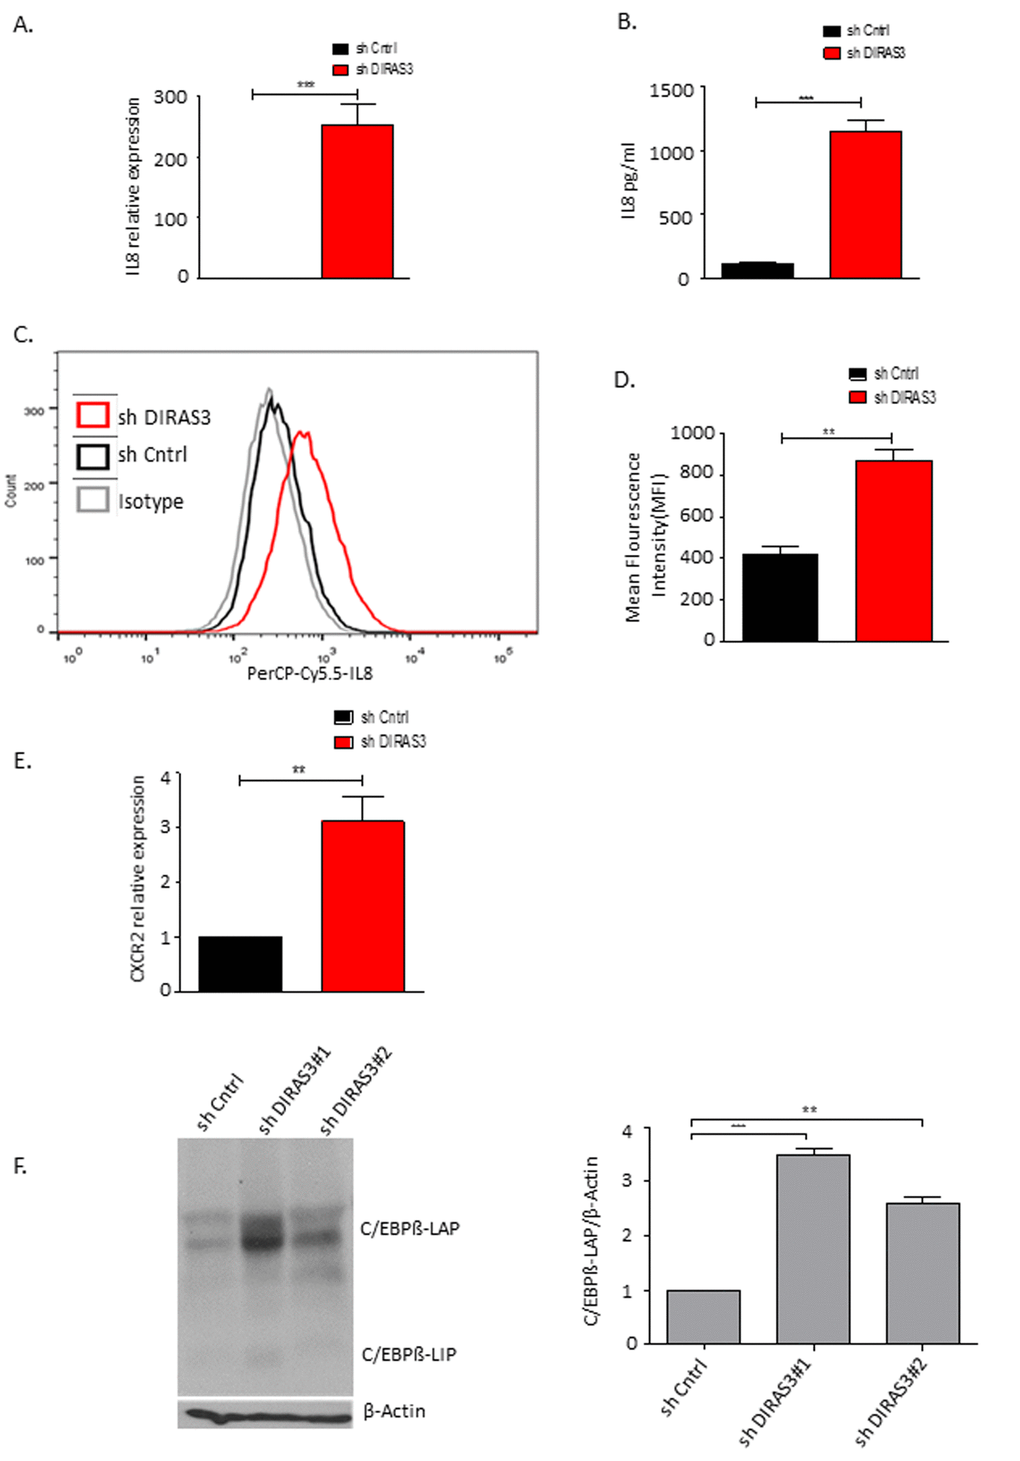 DIRAS3 KD induced senescence lead to higher production of IL-8. (A) IL-8 mRNA was quantified using q-RT PCR upon DIRAS3 KD (n=4). (B) IL-8 protein level in cell culture supernatant was quantified by ELISA (n=3). (C and D) Differentially transduced ASCs were incubated for 4 hours with brefeldin A (5µg/ml) – a protein transport inhibitor from Endoplasmic reticulum to Golgi complex, followed by fixation and permeabilization. Cells were stained by PerCP-Cy5.5-IL-8 antibody and analyzed by FACS (n=2). (E) CXCR2 mRNA was quantified using q-RT PCR upon DIRAS3 KD (n=4) (F) (Left panel) C/EBPβ protein level upon KD of DIRAS3 was analyzed by immune-blotting using anti-C/EBPβ antibodies. β-Actin served as input control. (Right panel) Fold changes in densitometric band intensities for phosphorylated proteins normalized to un-phosphorylated total proteins, acquired by image J were compared. Band intensity of shCntrl was taken as 1. Western blot shown is from replicate from one donor with similar protein expression pattern was observed with 2 different donors. All error bars represents the means ± SEM. p values * = p